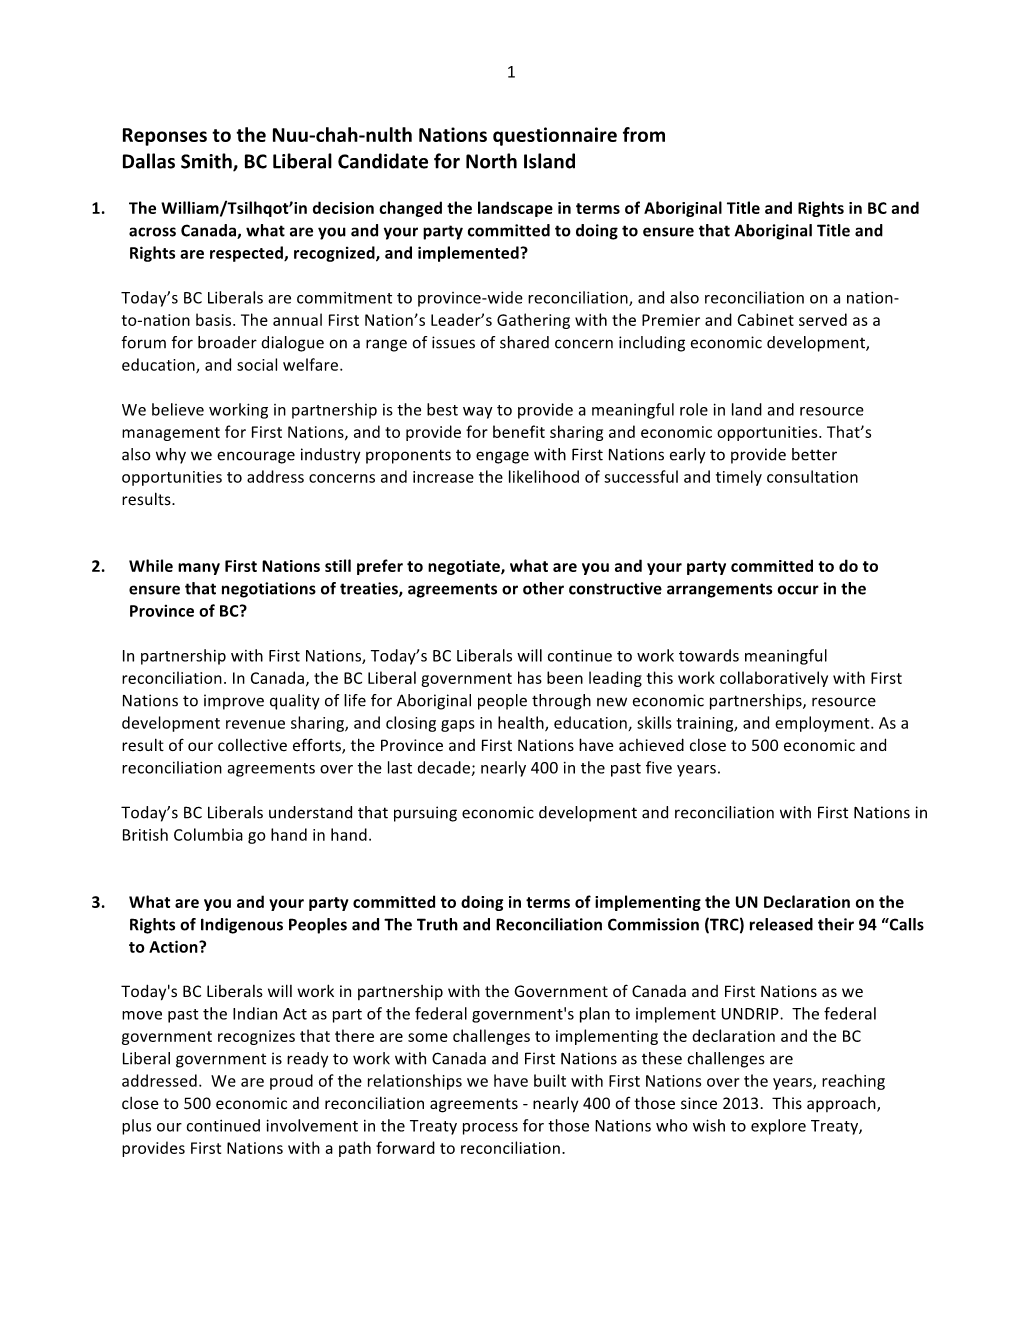 Reponses to the Nuu-Chah-Nulth Nations Questionnaire from Dallas Smith, BC Liberal Candidate for North Island